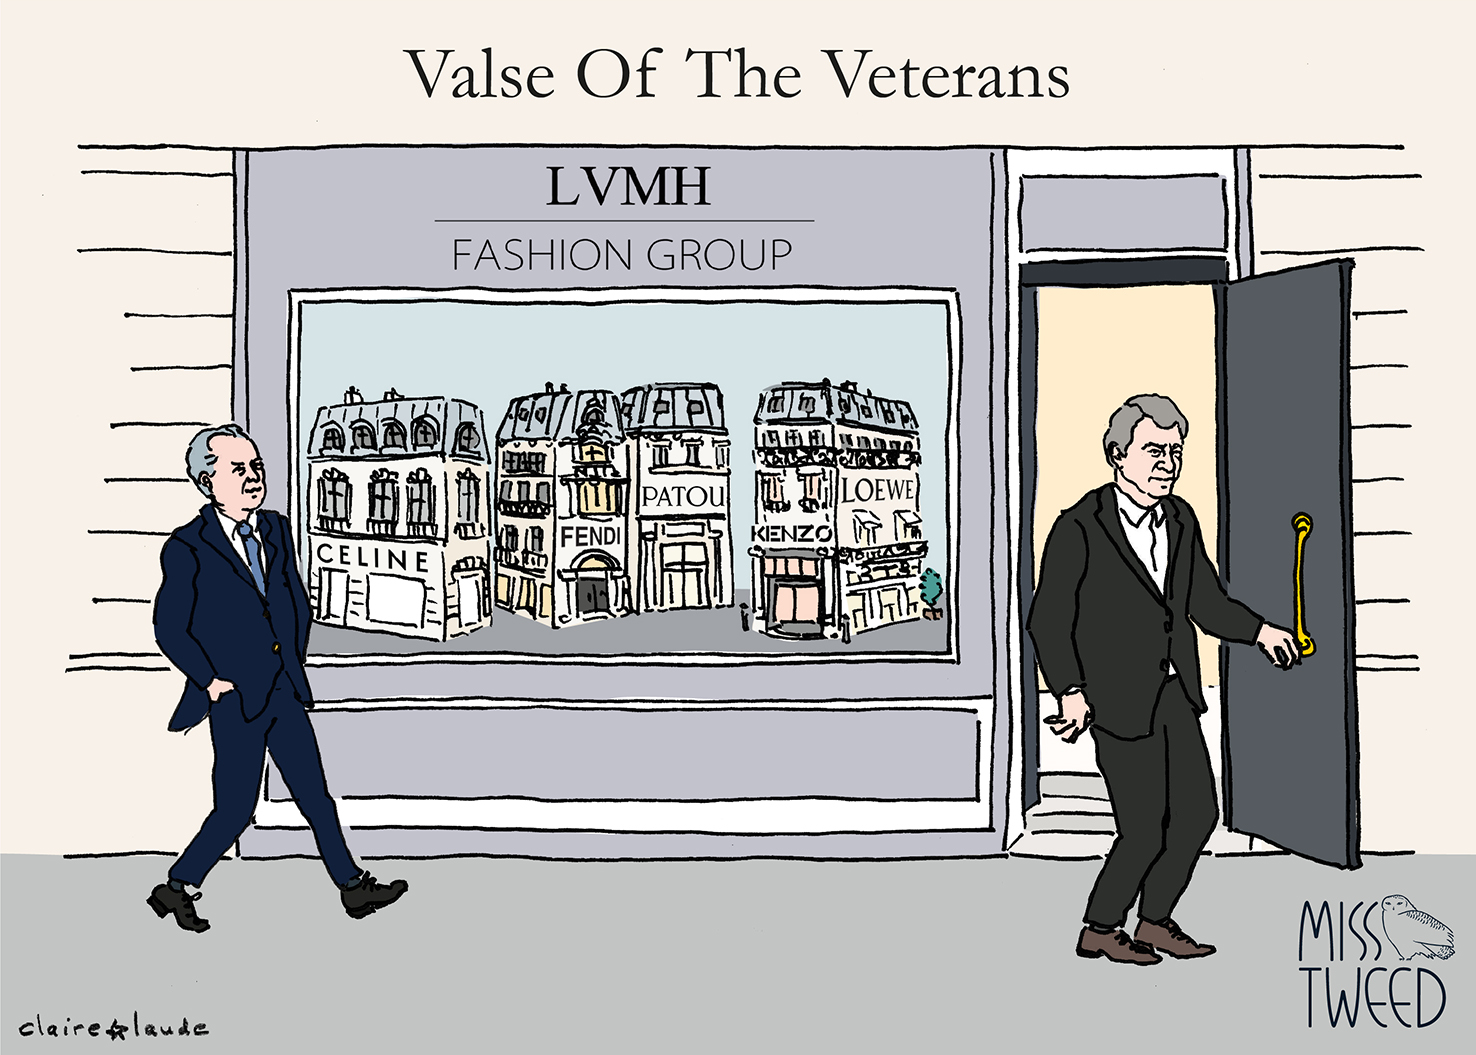 Former LV boss set to become new CEO of LVMH Fashion Group